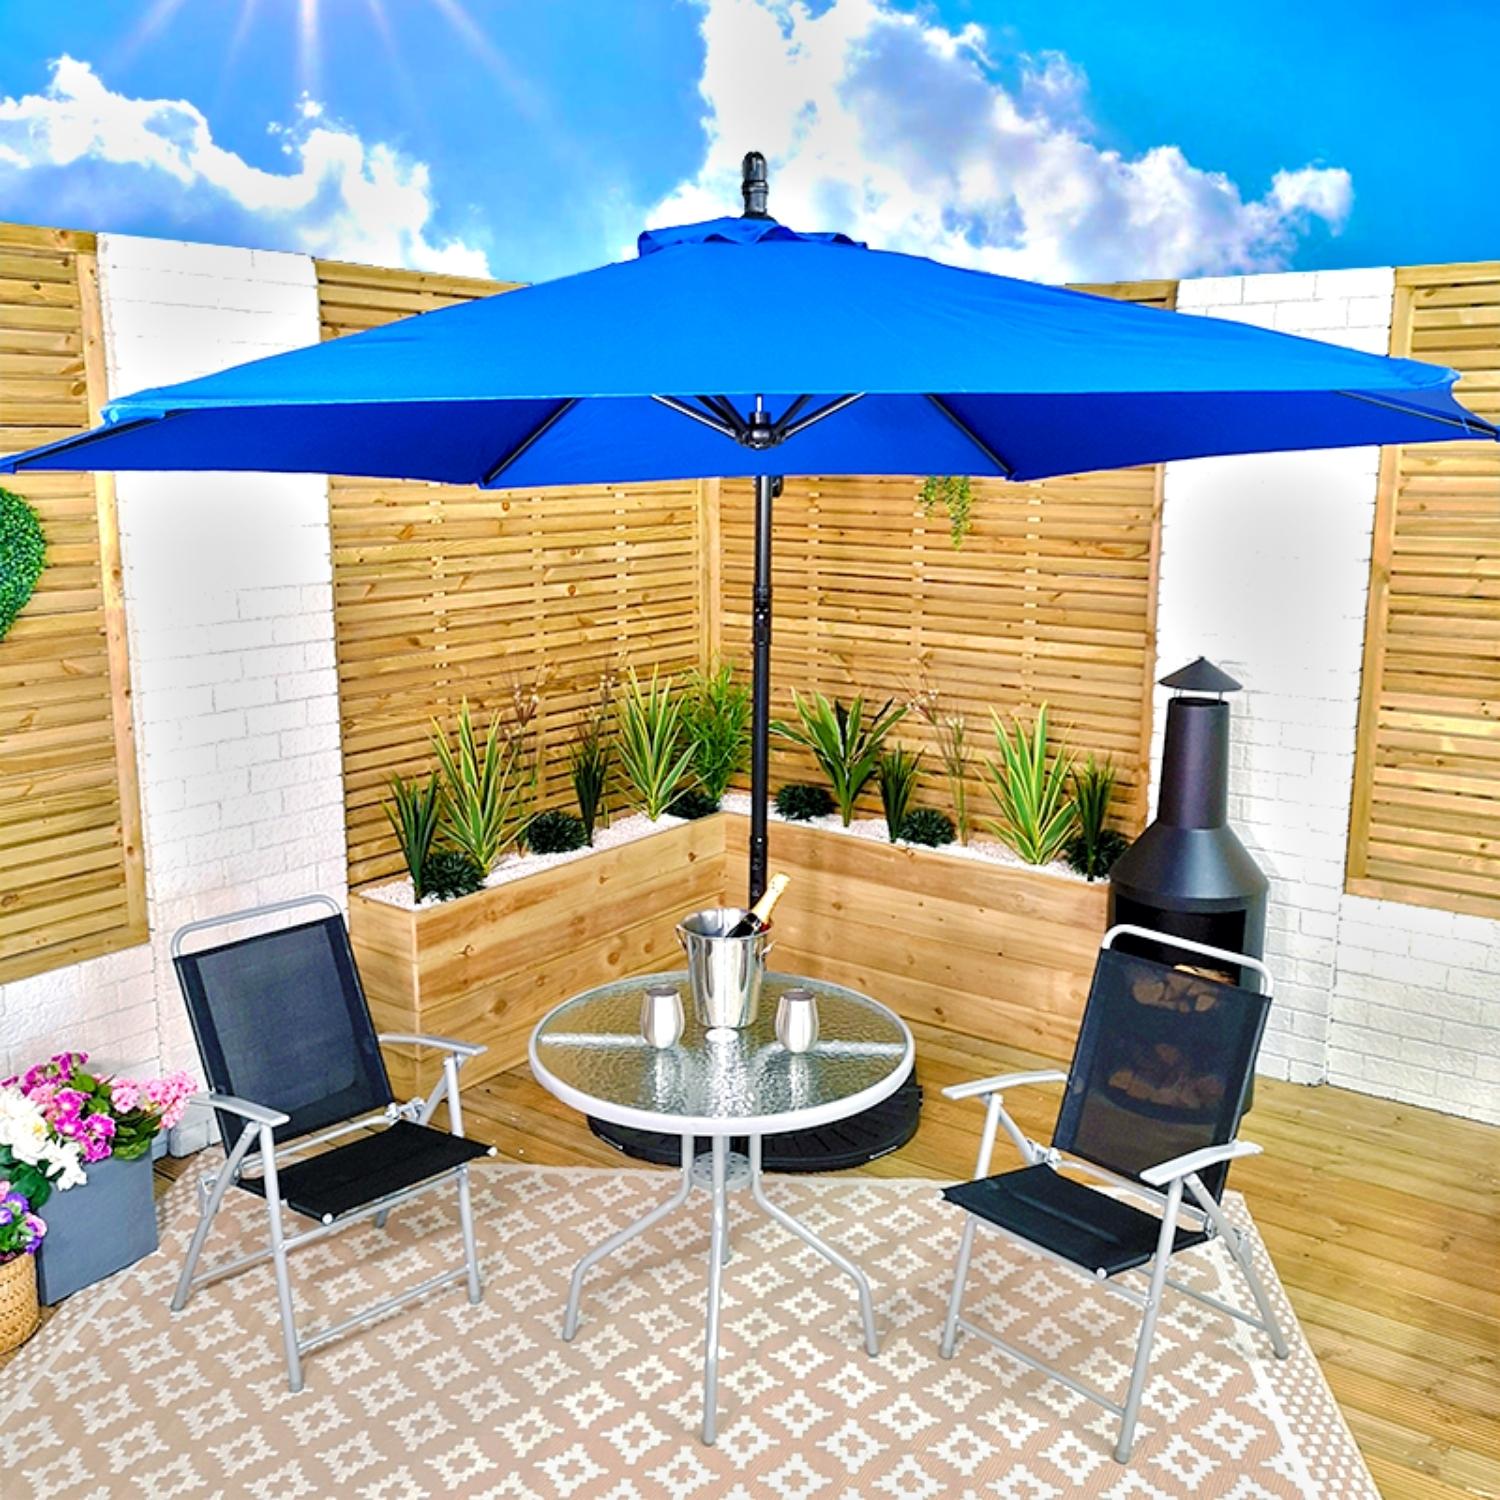 3m Hanging Banana Cantilever Garden Parasol with Cover in Blue